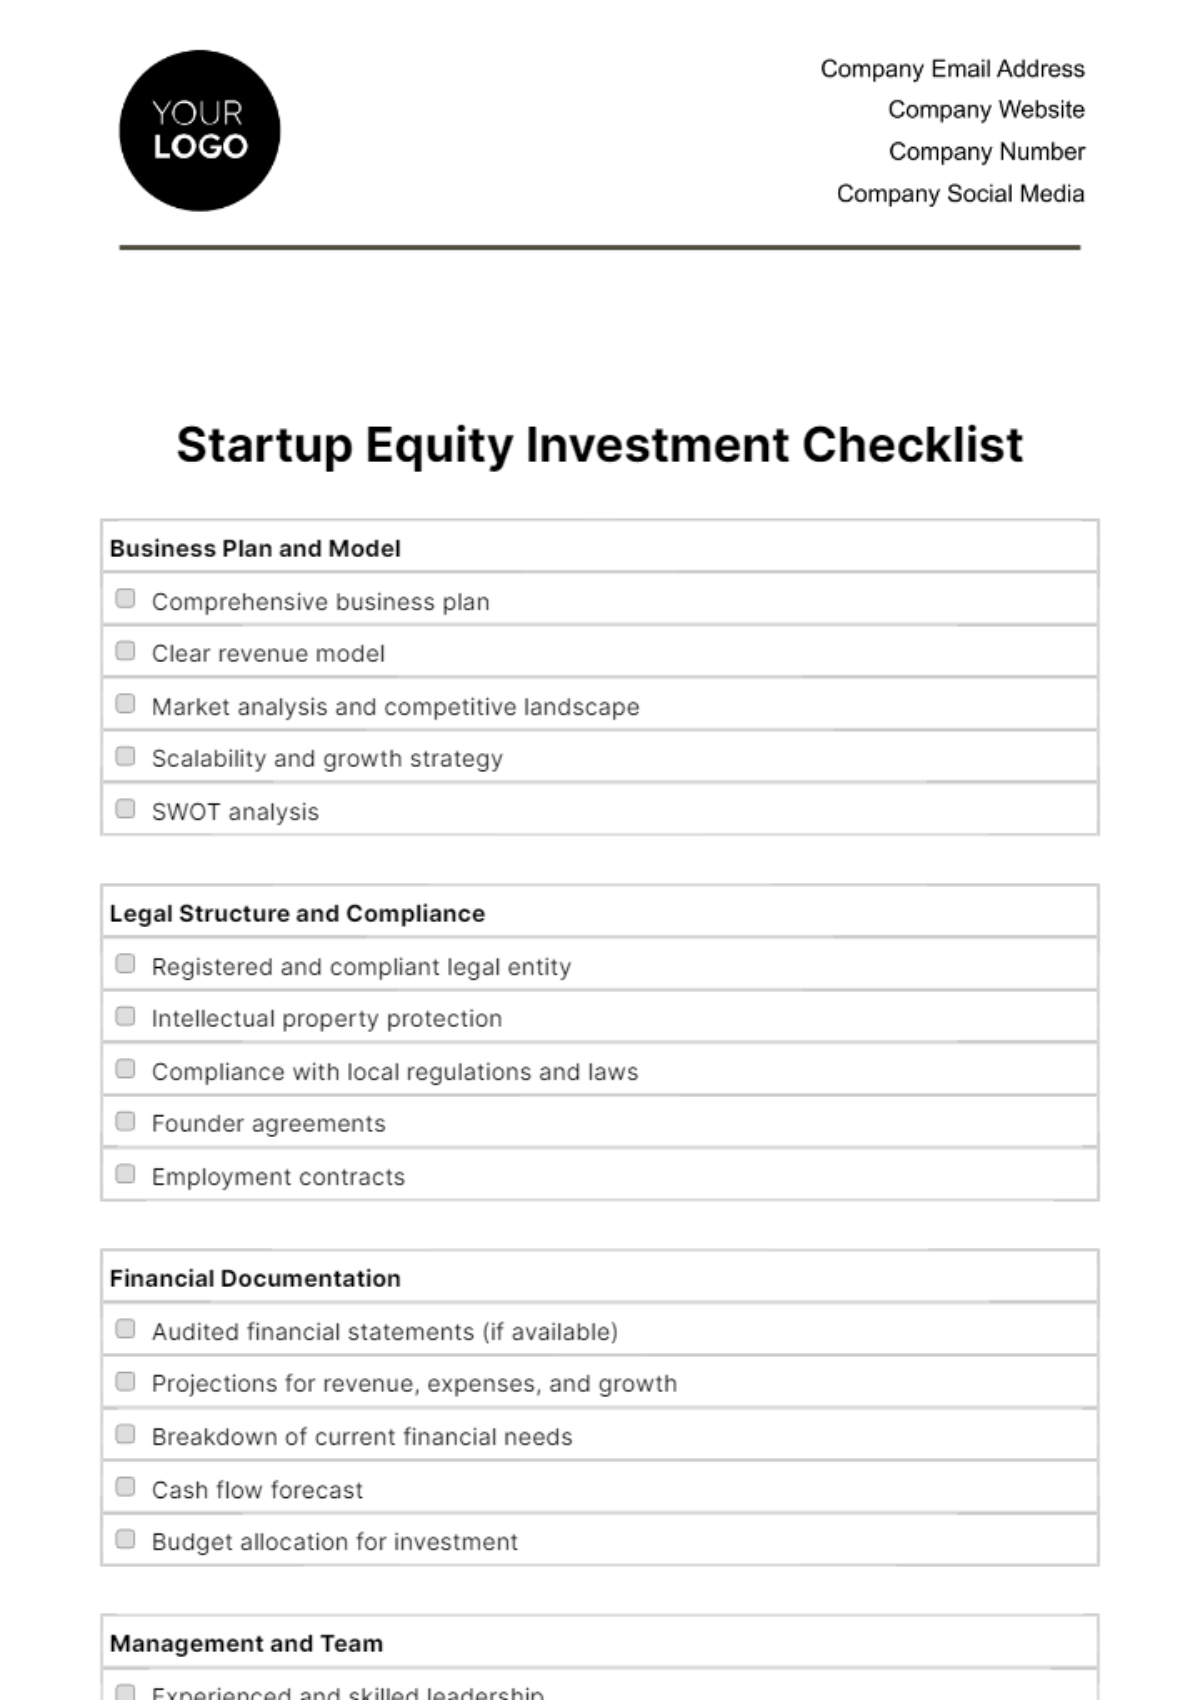 Free Startup Equity Investment Checklist Template